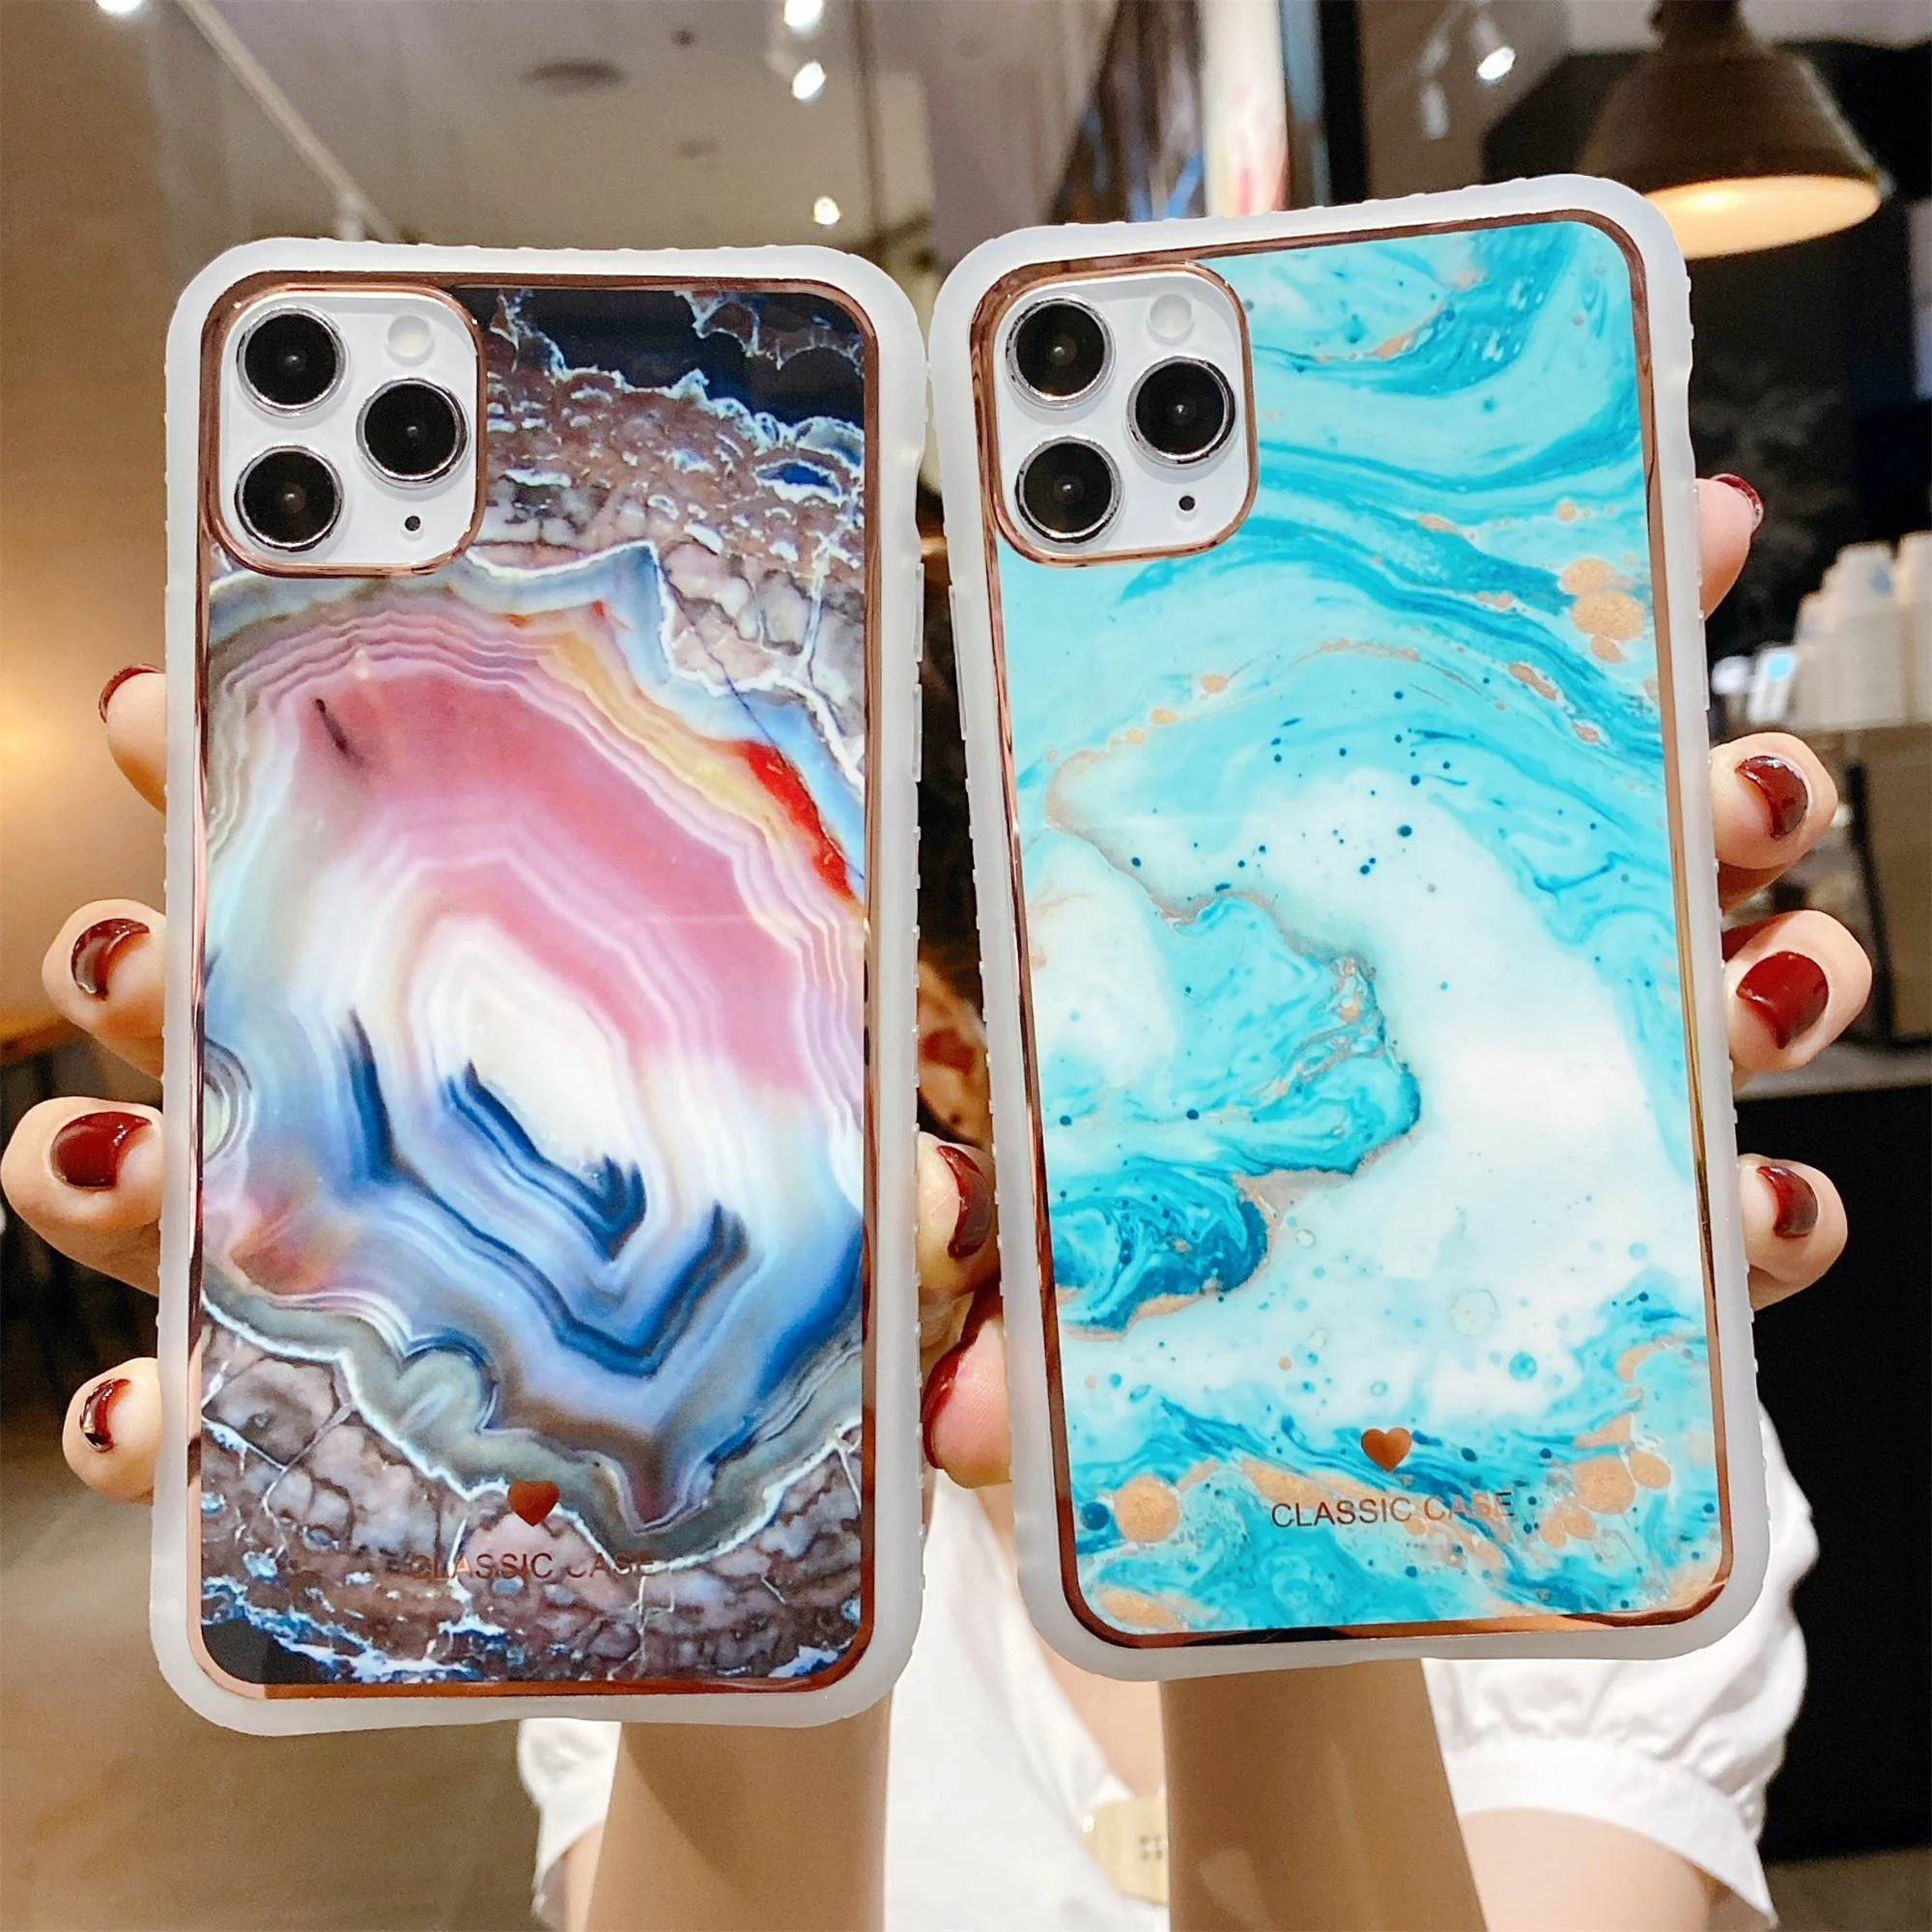 

High Quality IMD Electroplating Phone Cover for Iphone 8 6s 6 7 8Plus X XS XR XsMAX 11Pro Max 11 SE Marble Silicone Case